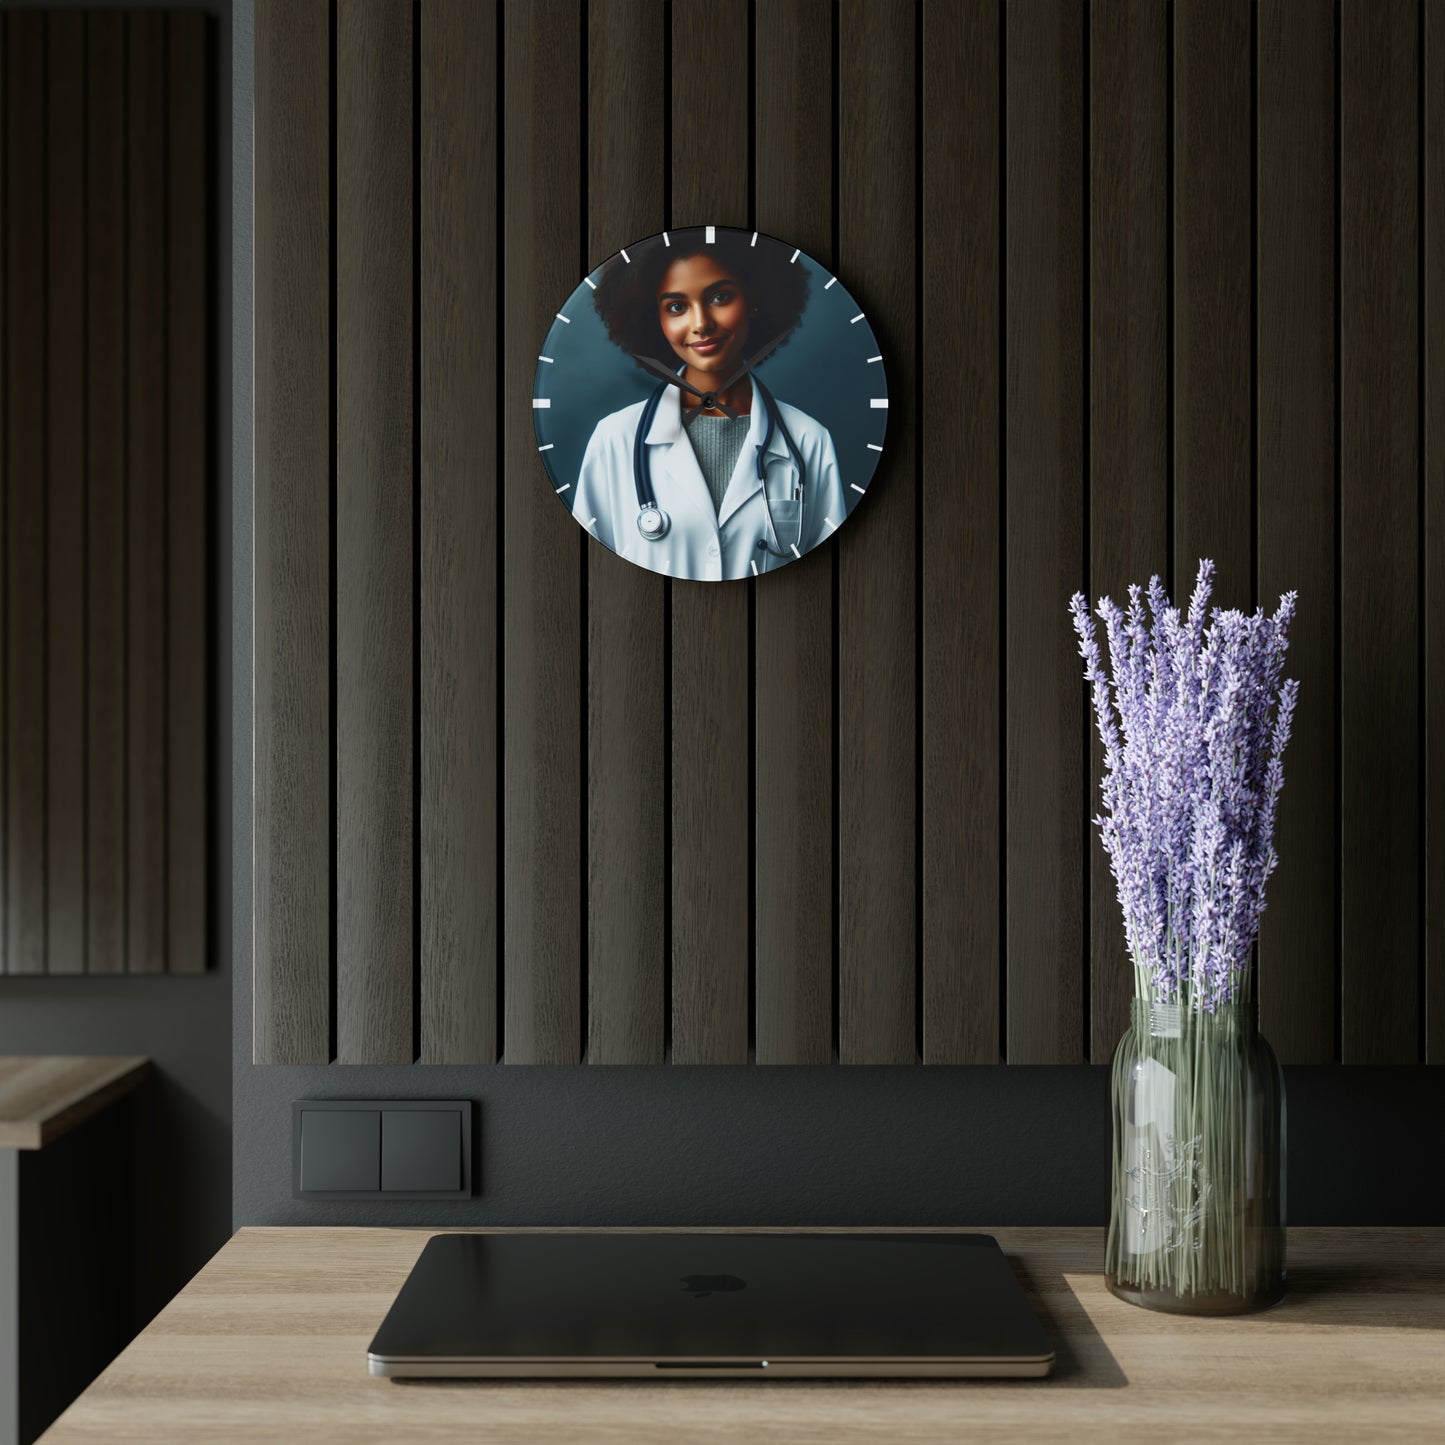 Contemporary acrylic wall Clock, modern timepiece for any space (Happy doctor's day)